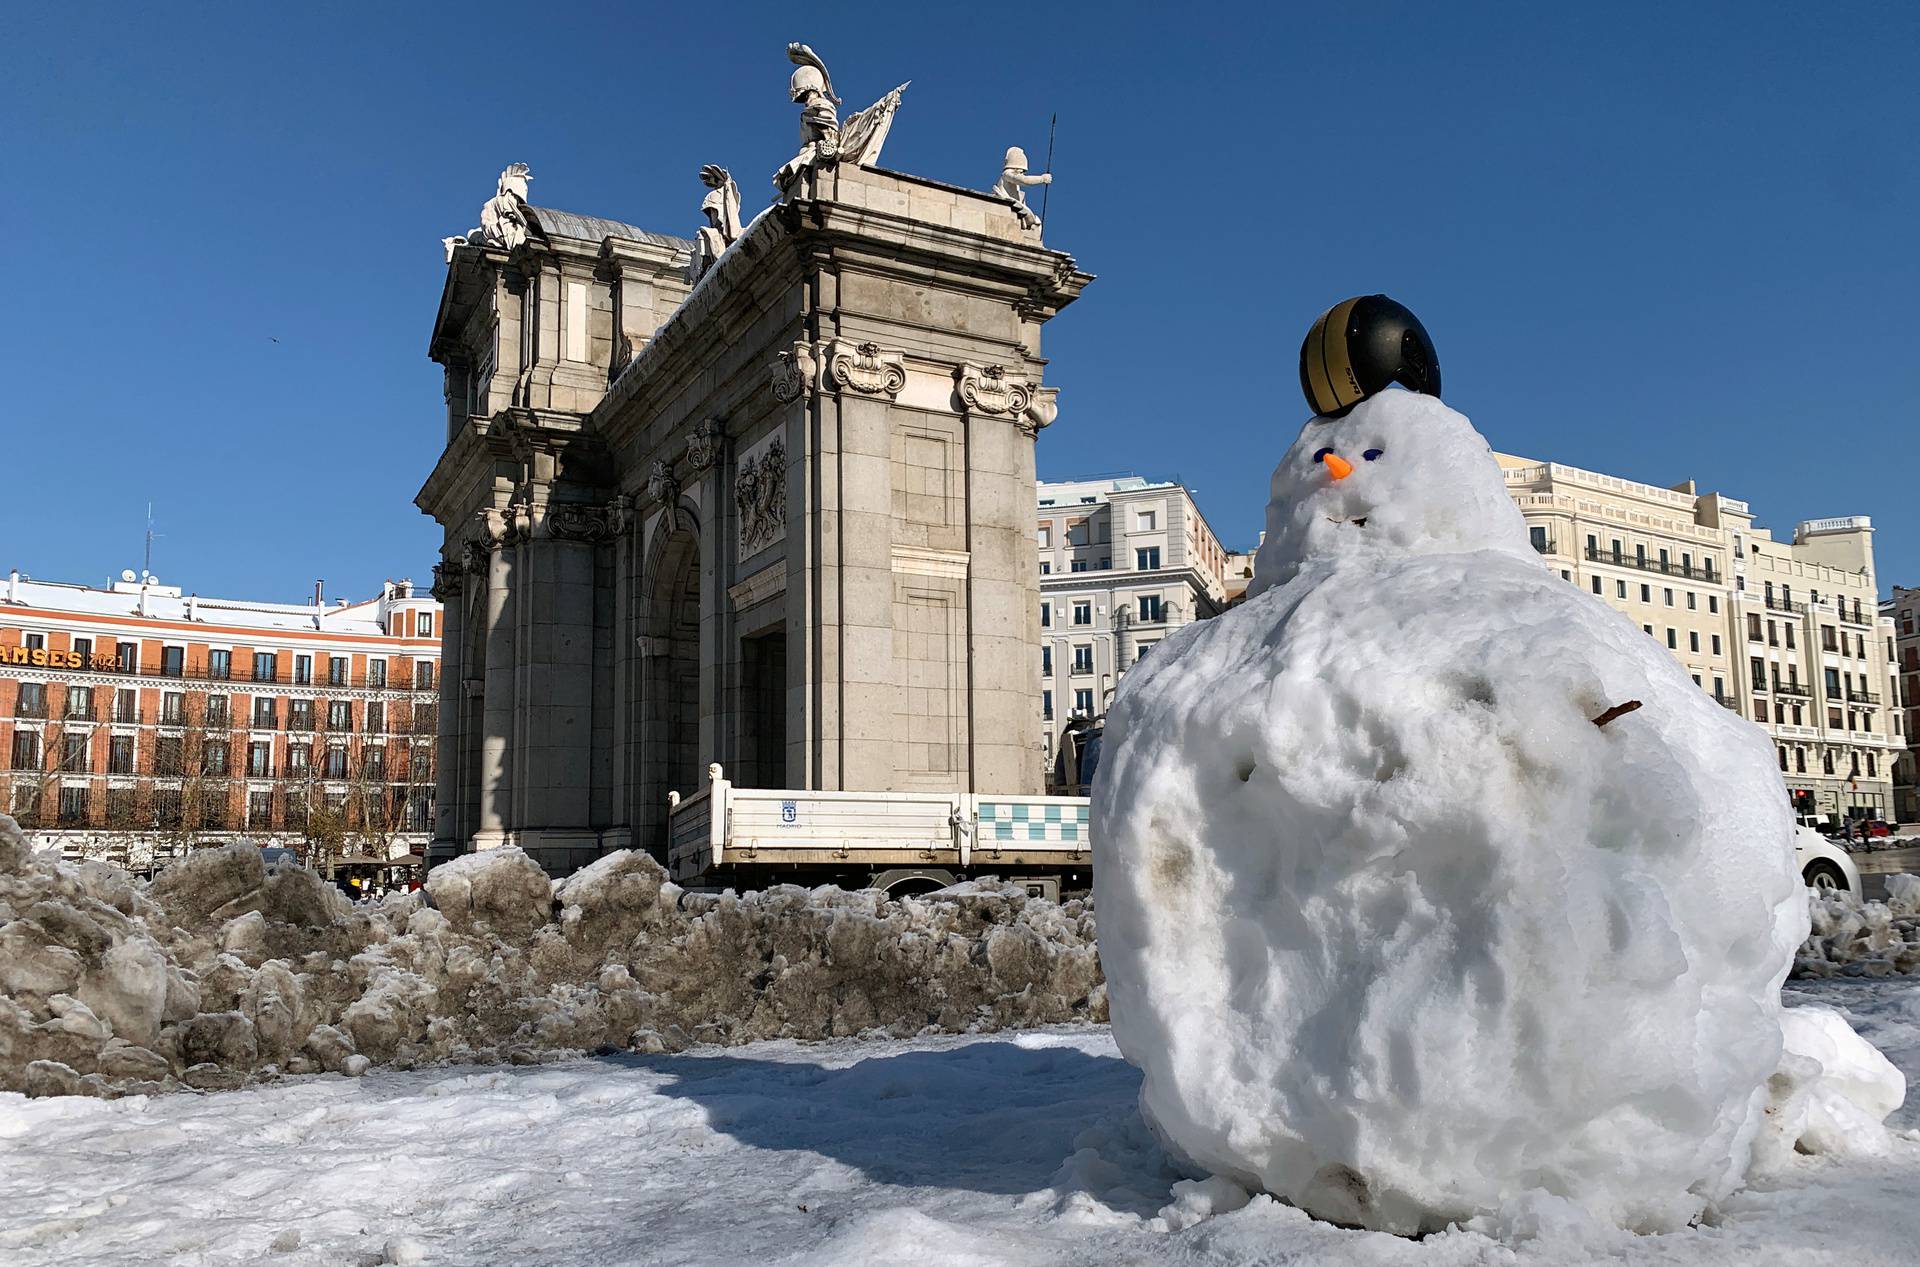 Snowman with a helmet is seen in front of the Puerta de Alcala monument, after heavy snowfal in Madrid